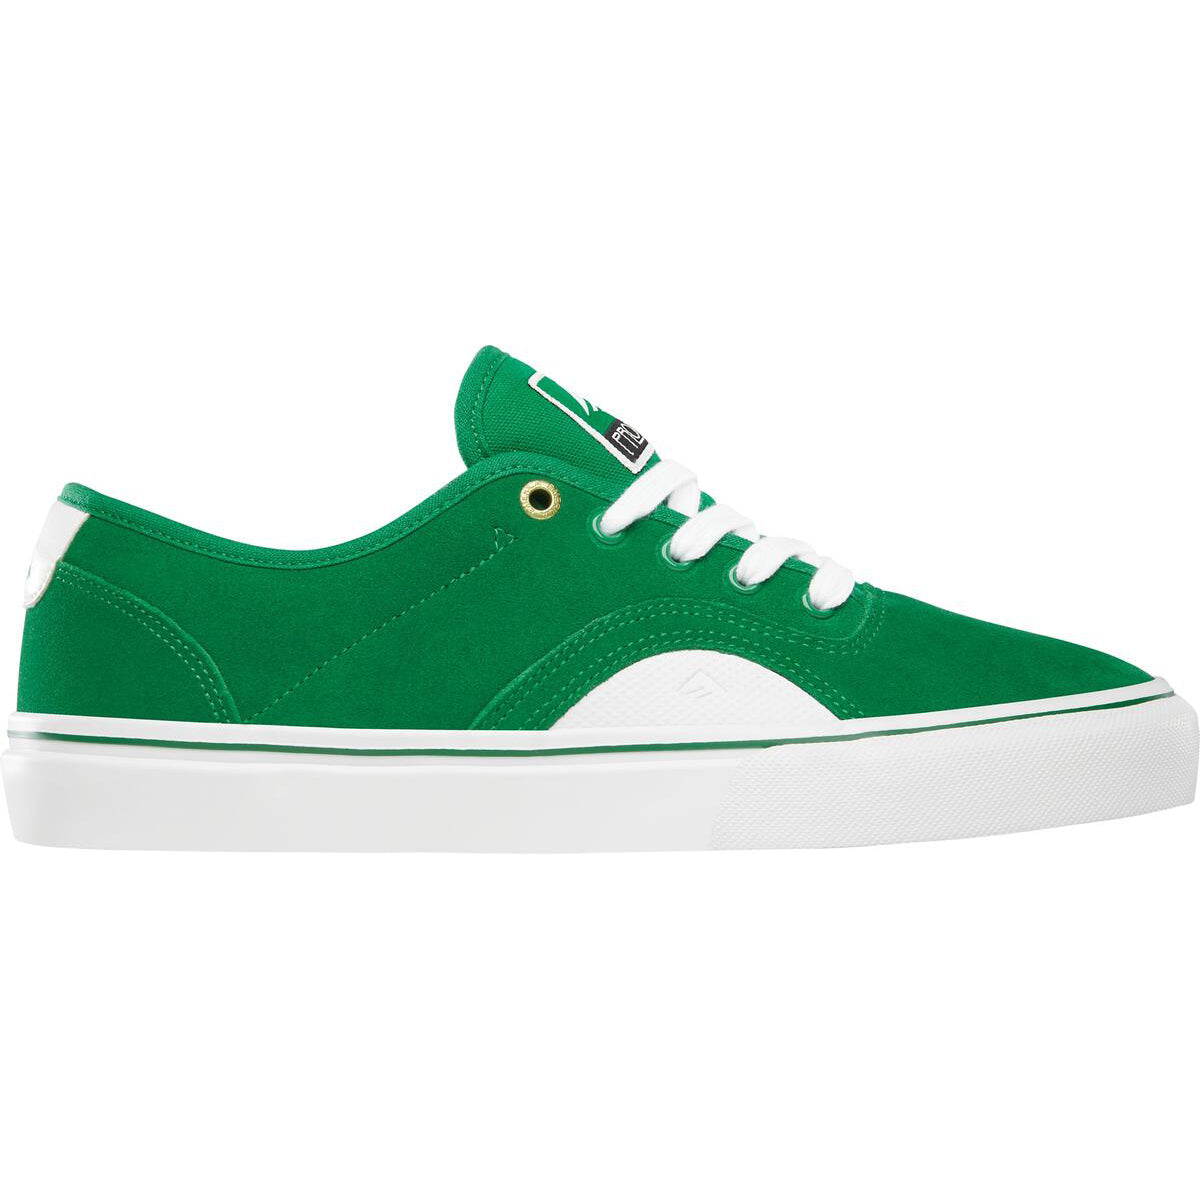 Emerica Provost G6 Green/White Shoes